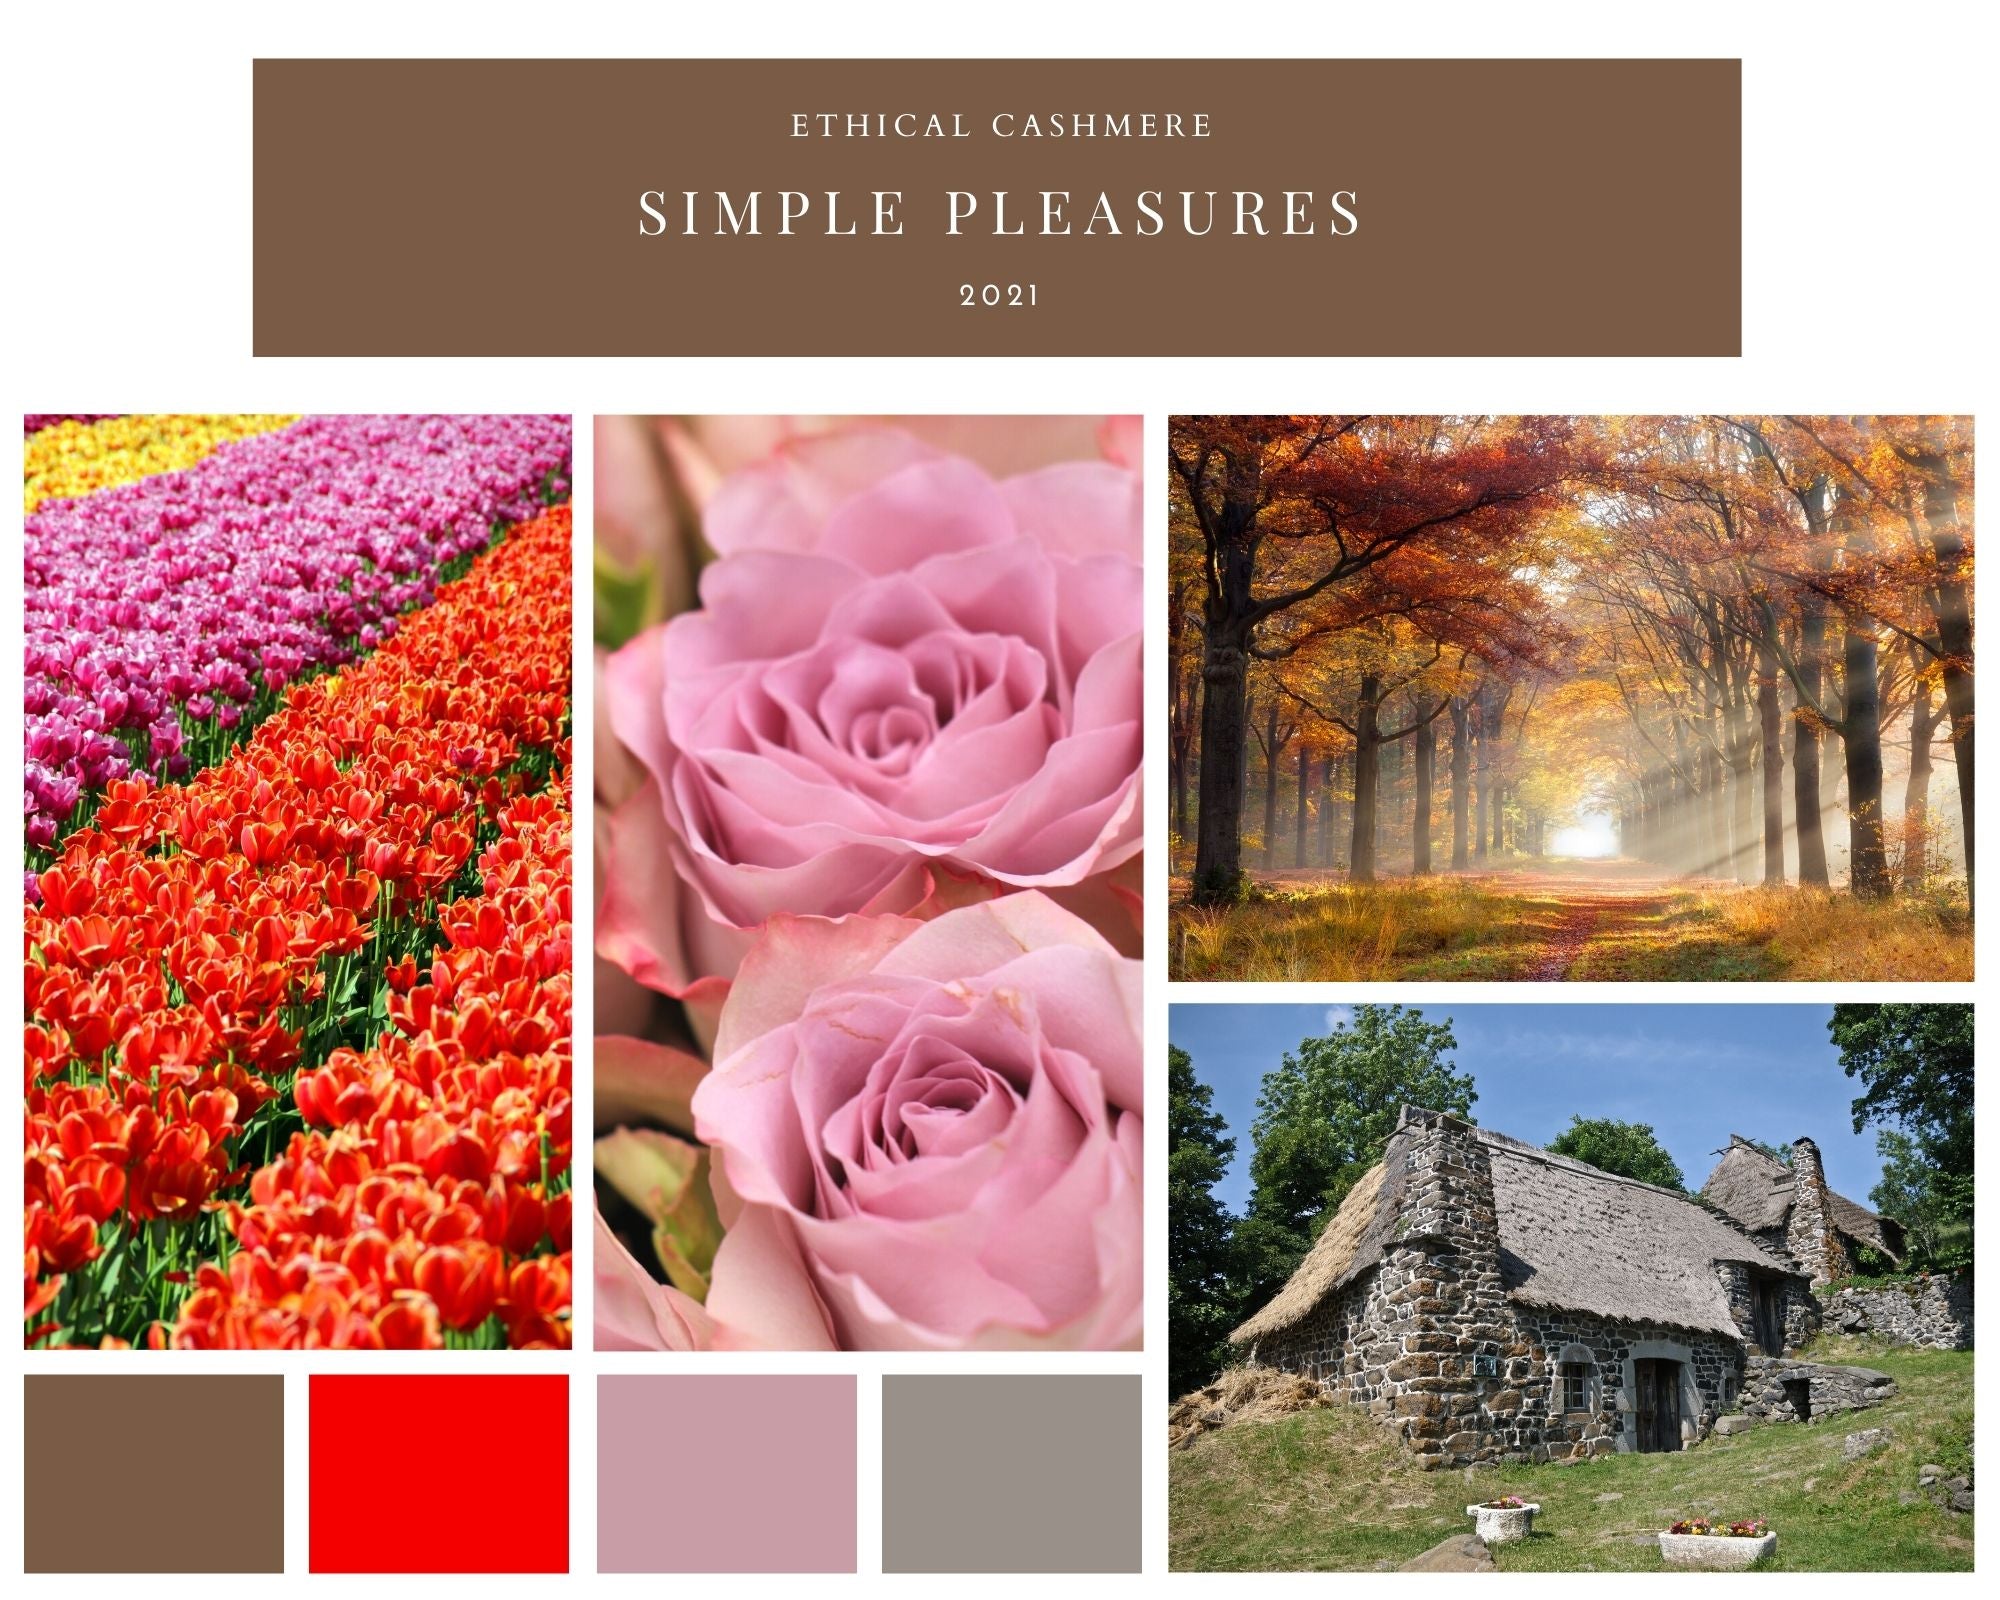 Collage of images depicting purple and vermillion rows of flowers, close-up of lilac antique roses, autumn forest, and slate grey stone cottage, providing colour inspiration for Ethical Cashmere's 2021 Simple Pleasures fall season.